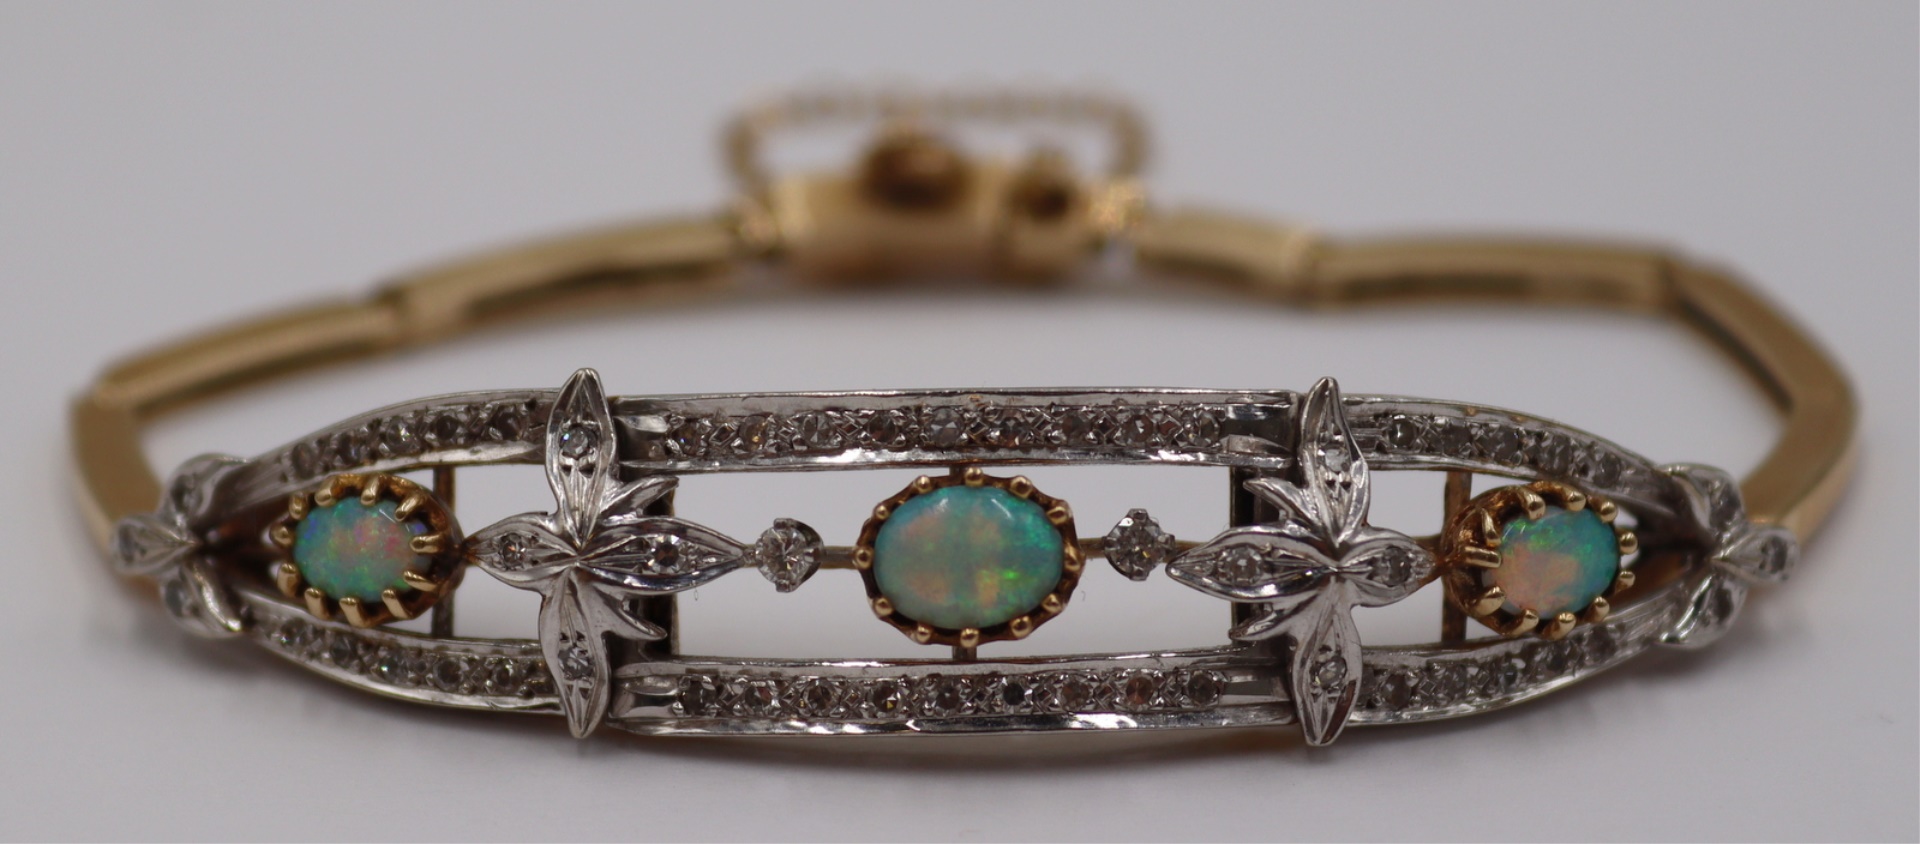 JEWELRY. 14KT GOLD, OPAL, AND DIAMOND